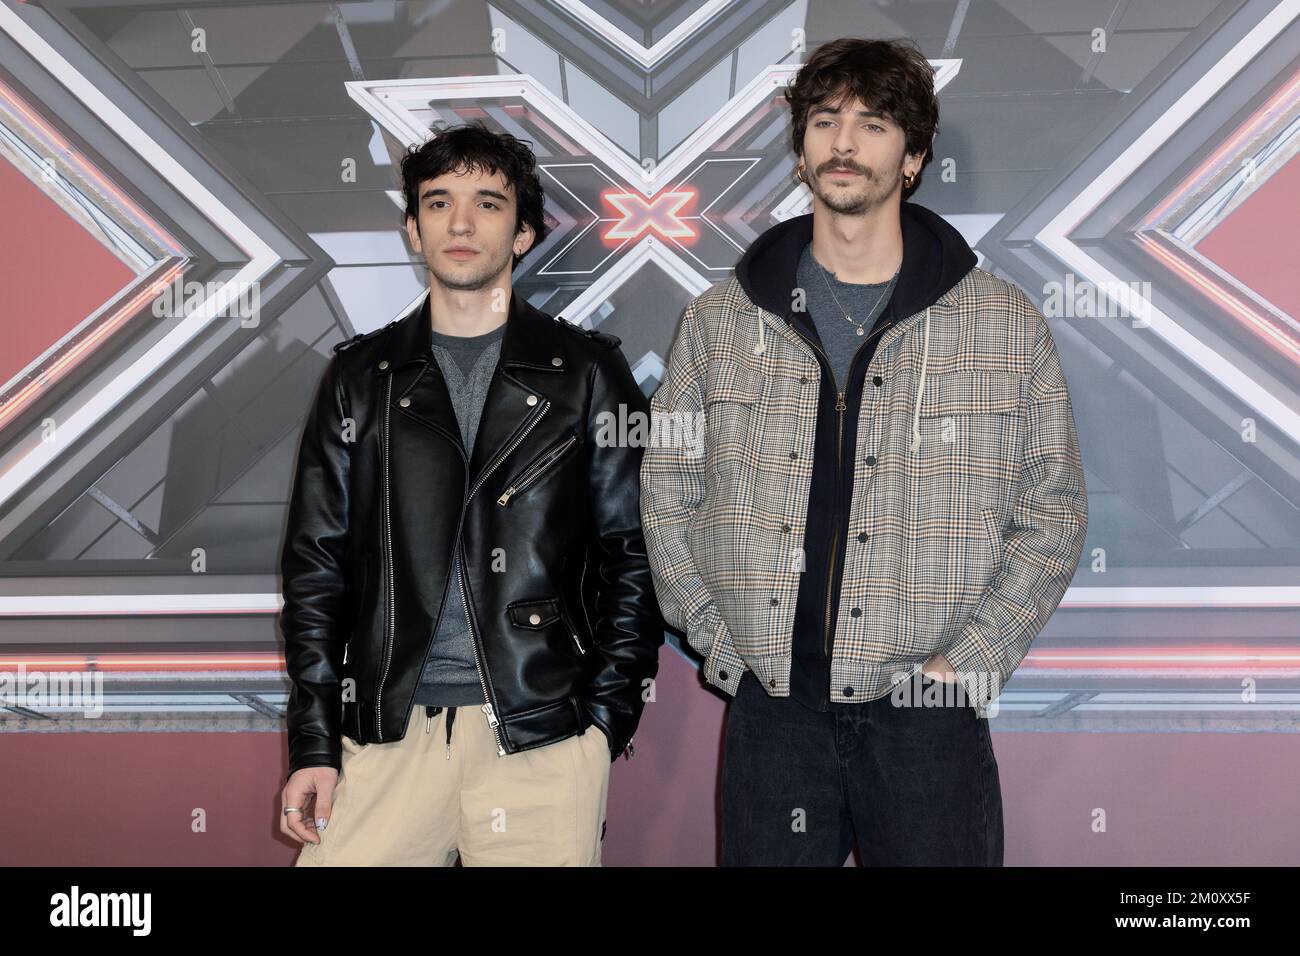 MILAN, ITALY - Dec 6, 2022 : Santi Francesi attend the press conference of X Factor Italy Final 2022 at Forum Assago in Milan, Italy. Stock Photo